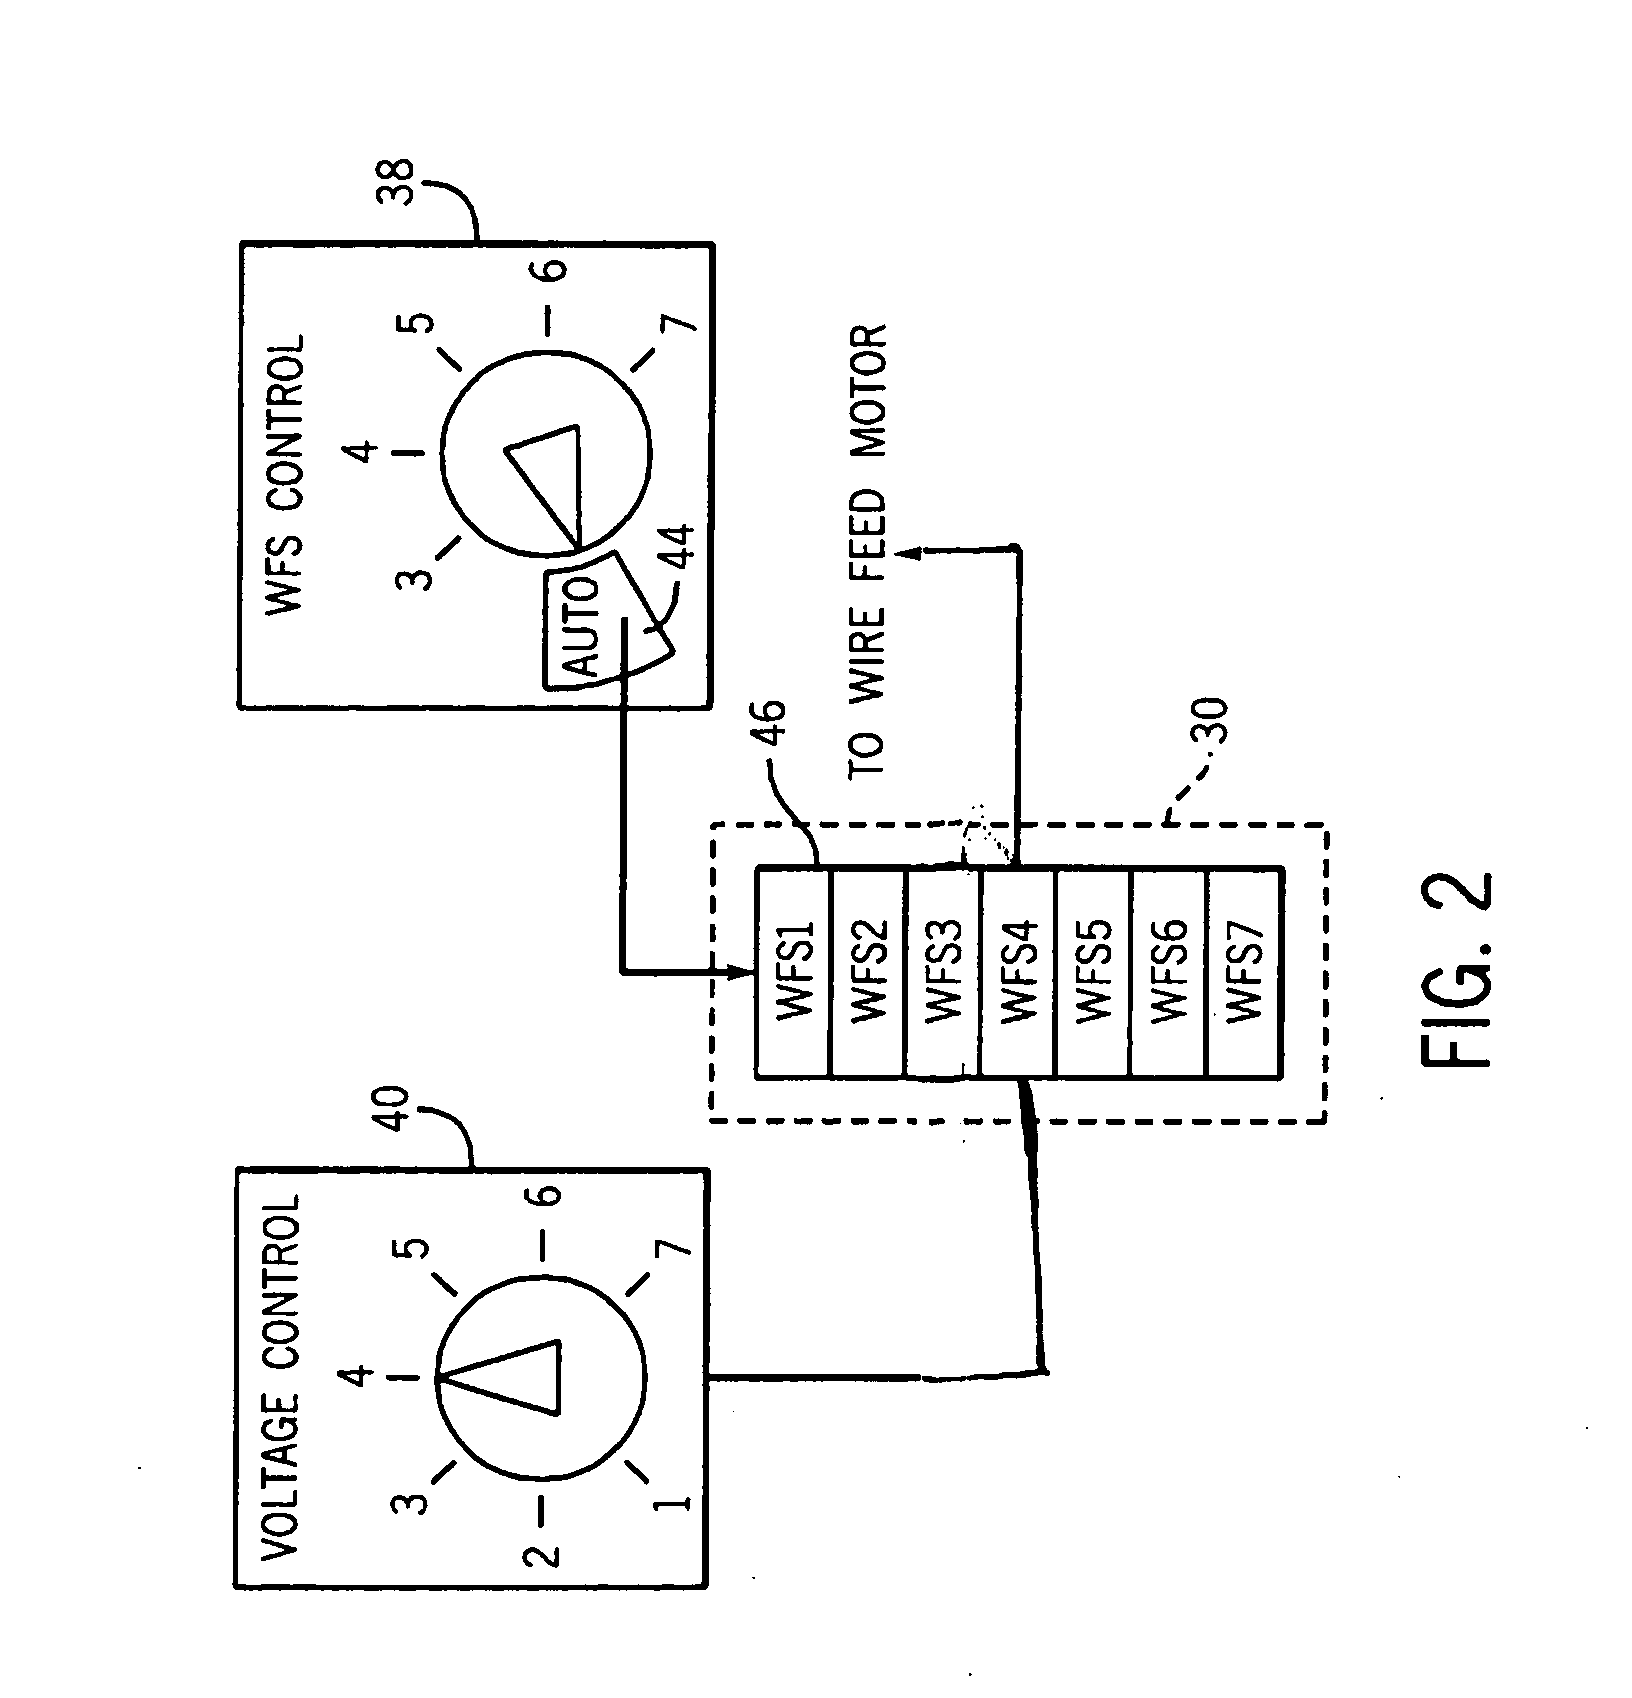 Welding wire feed speed control system method